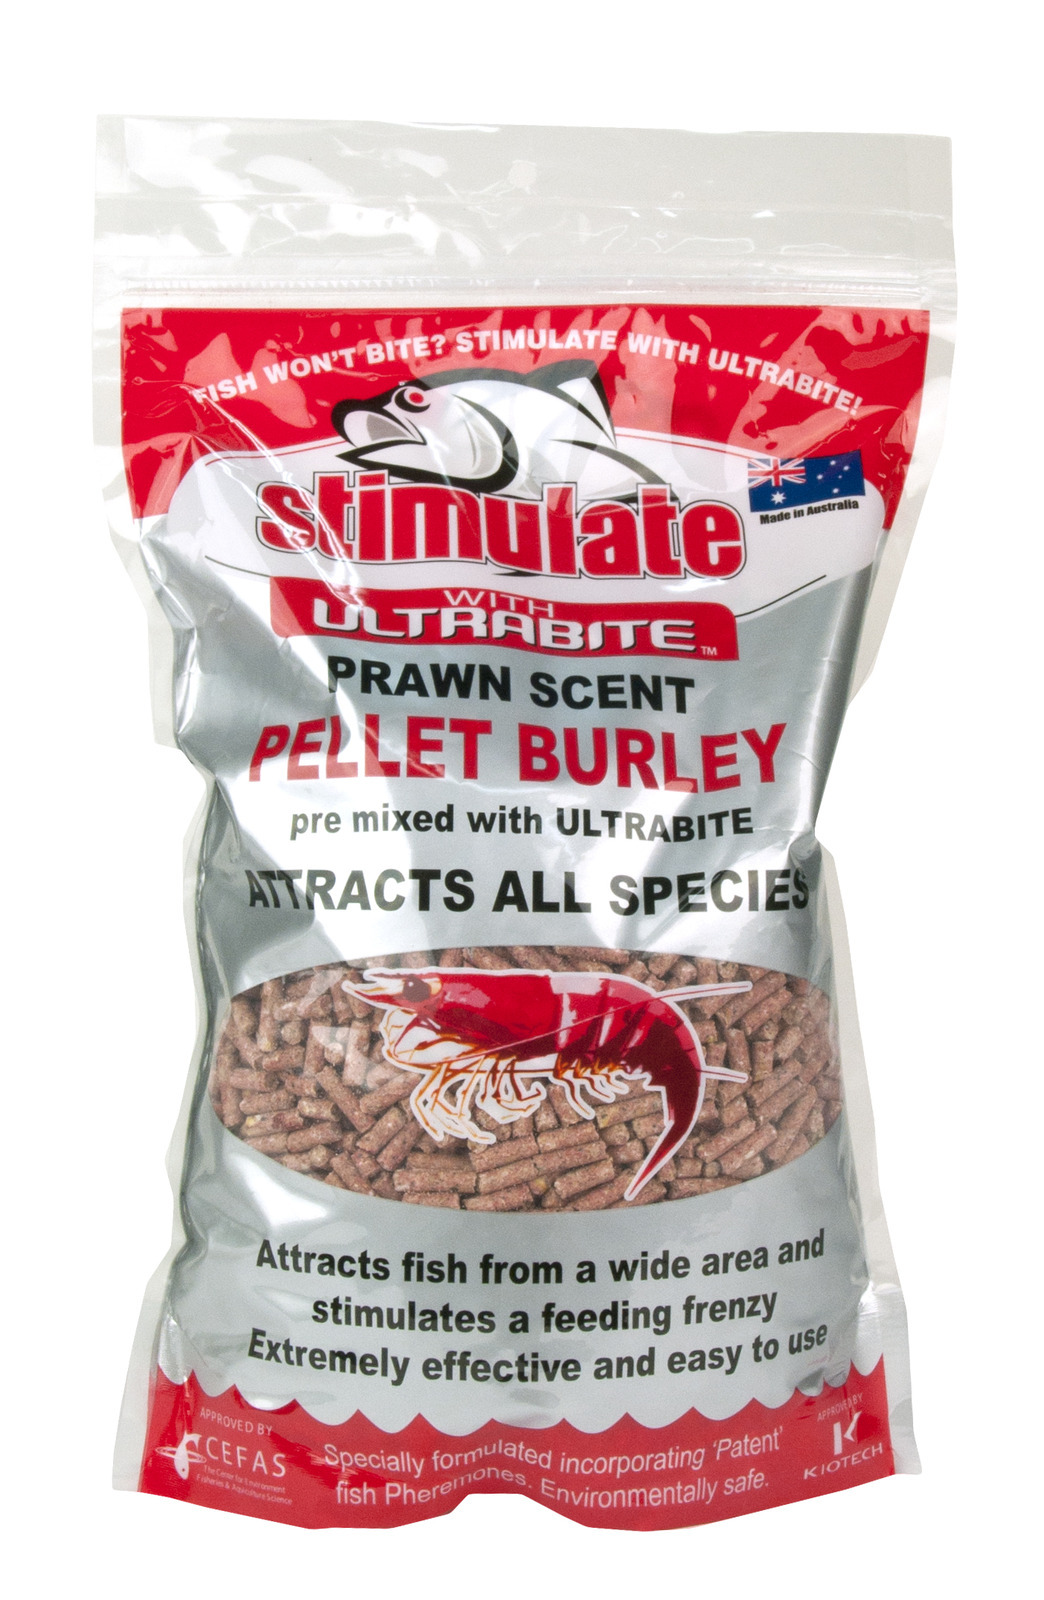 1 Kg Stimulate Prawn Scent Pellet Burley Pre Mixed with Ultrabite - Berley  Pellets